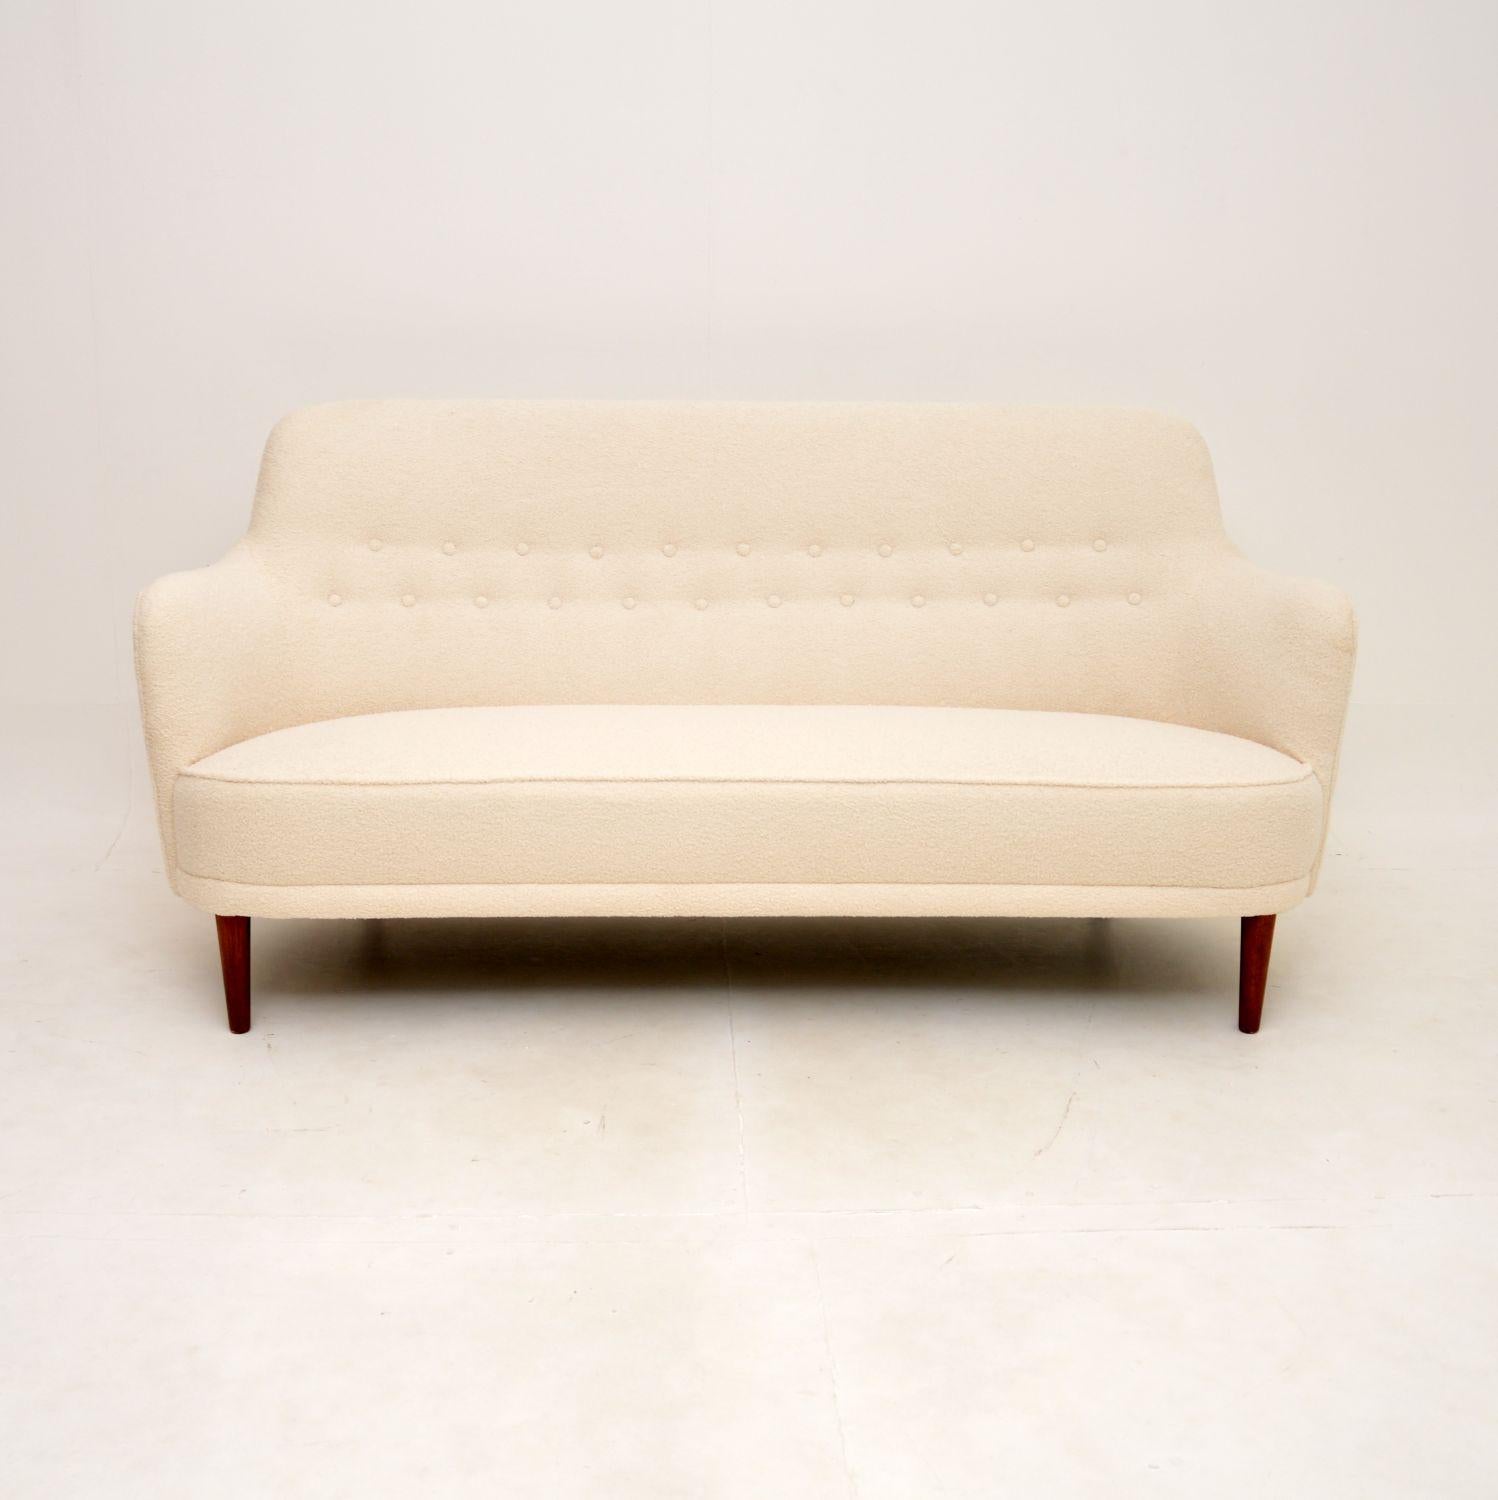 A stunning and extremely comfortable vintage Swedish ‘Samsas’ sofa by Carl Malmsten. It was recently imported from Sweden, it dates from around the 1960’s.

This is of extremely high quality, the well built frame looks amazing from all angles and is